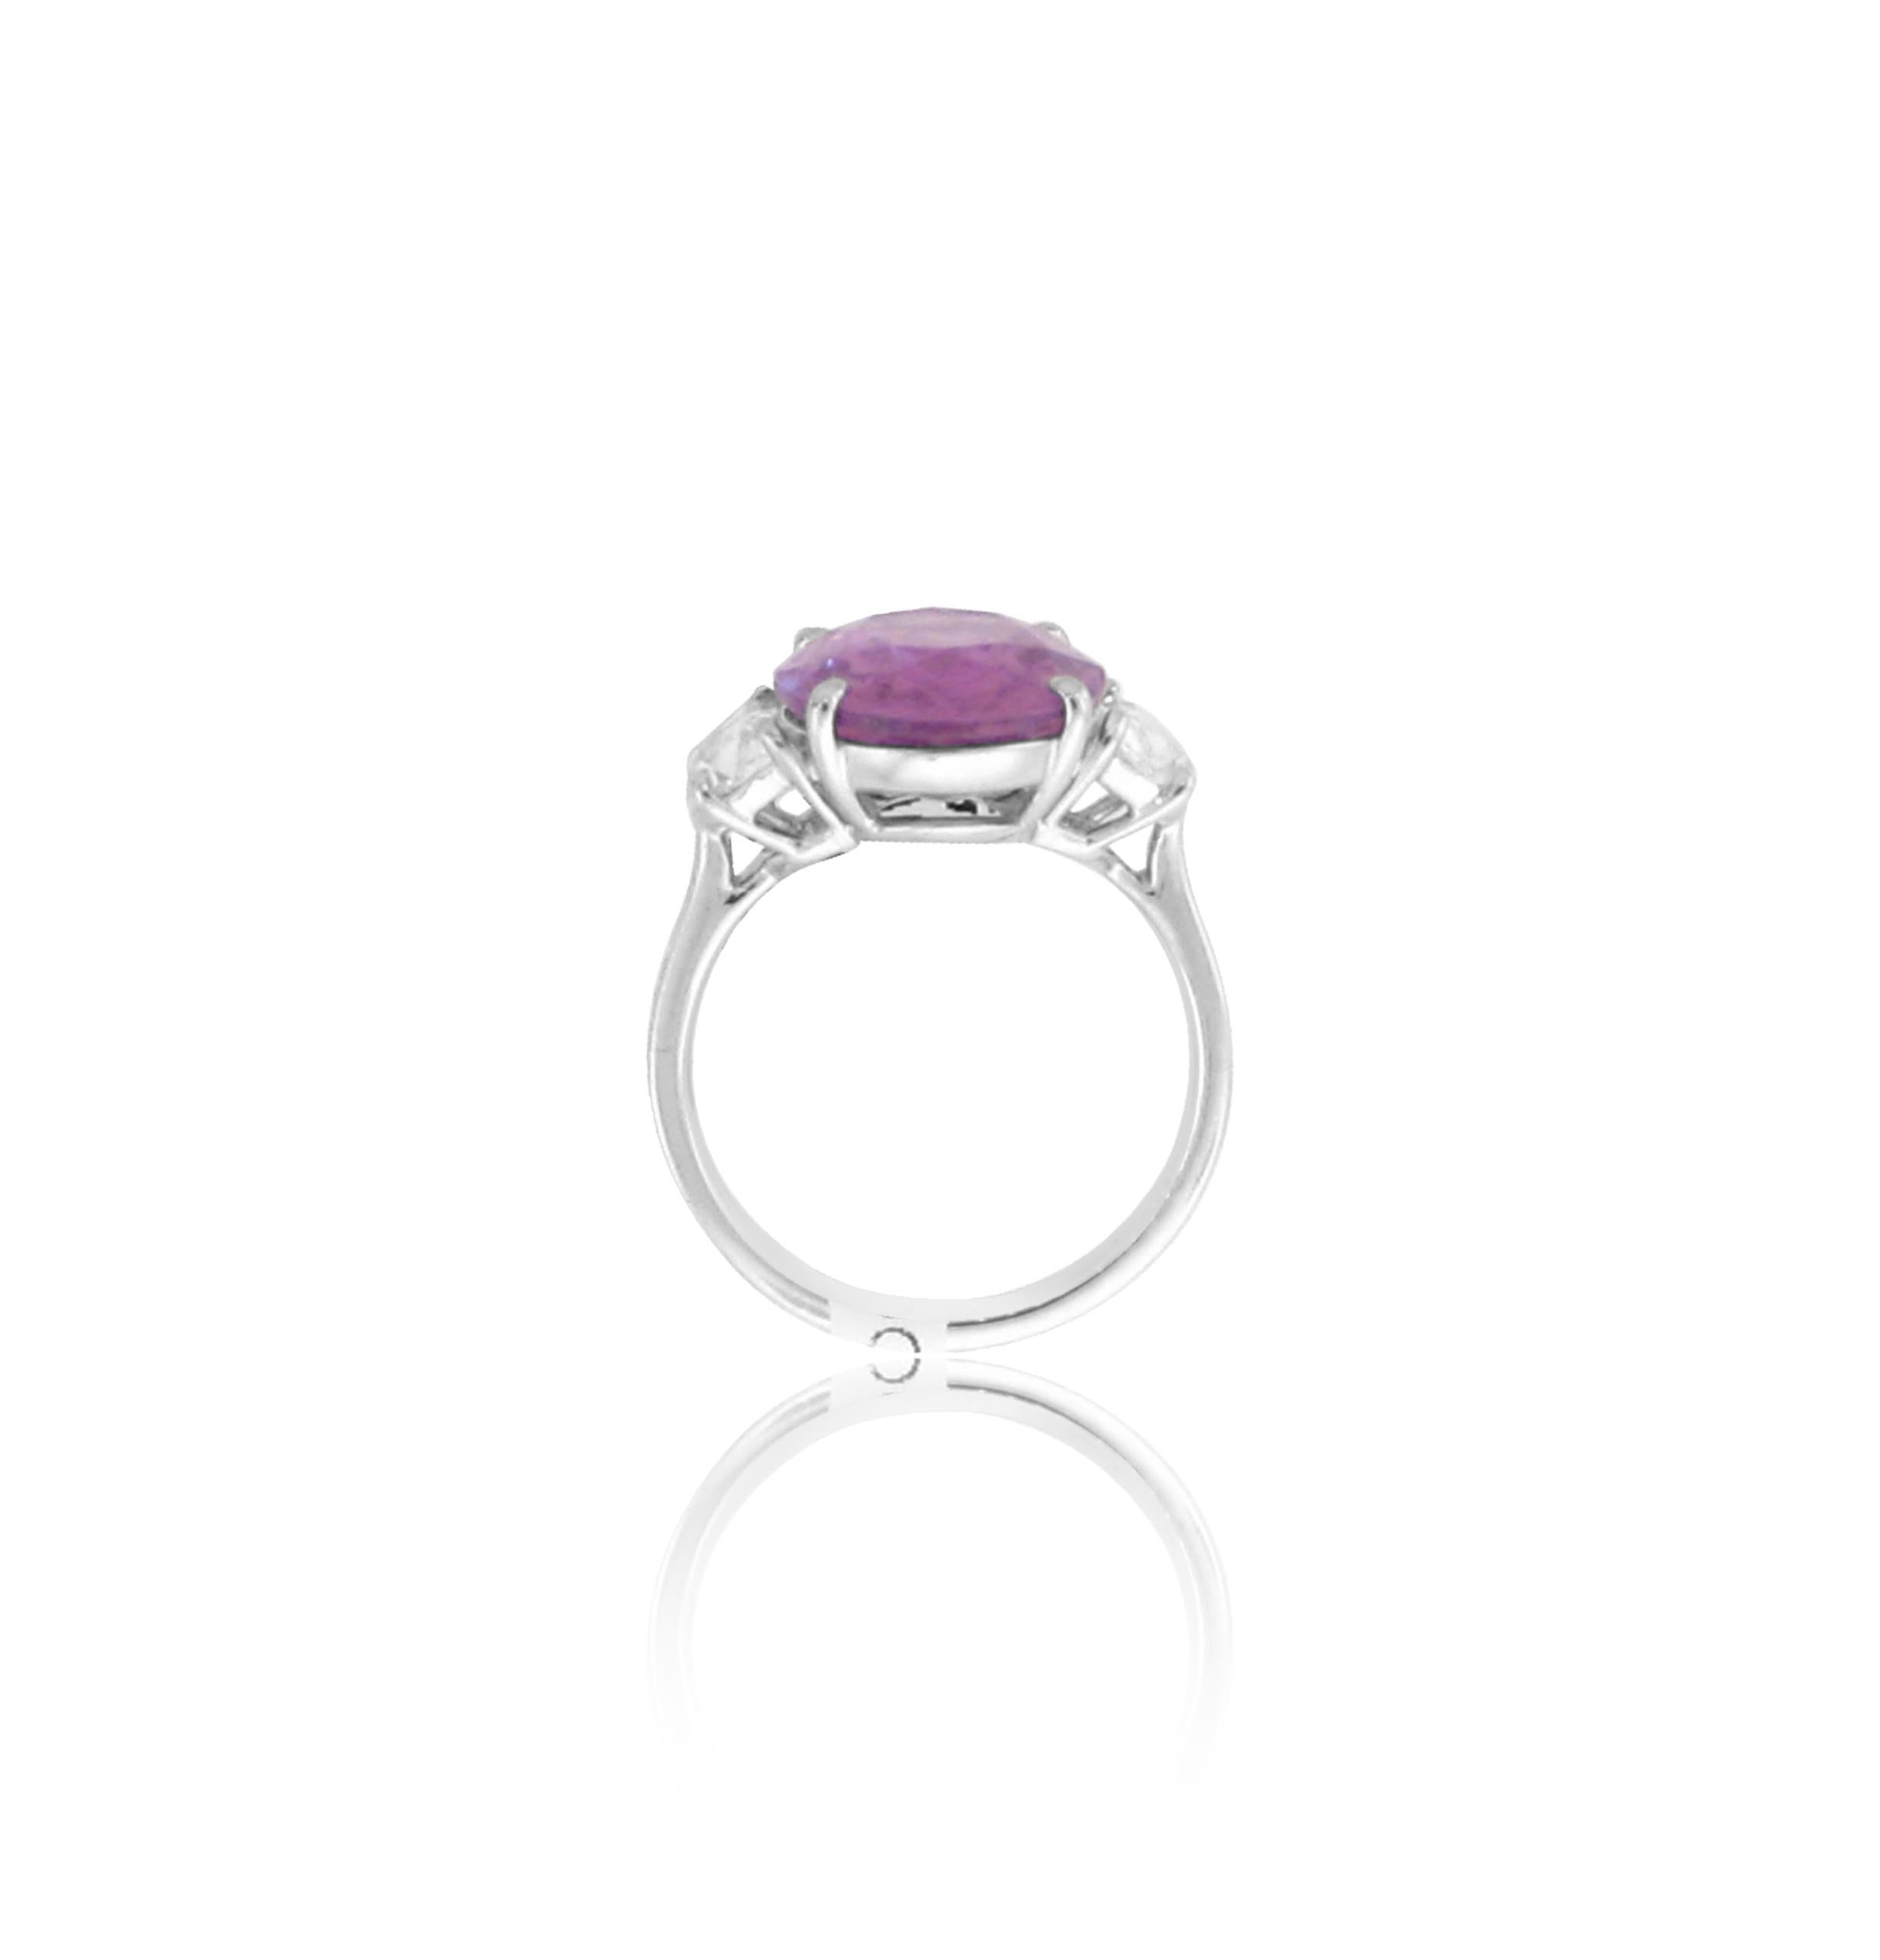 Modern Luxurious 3 Stone Pink Sapphire And Half Moon Diamonds Ring - GIA certified For Sale